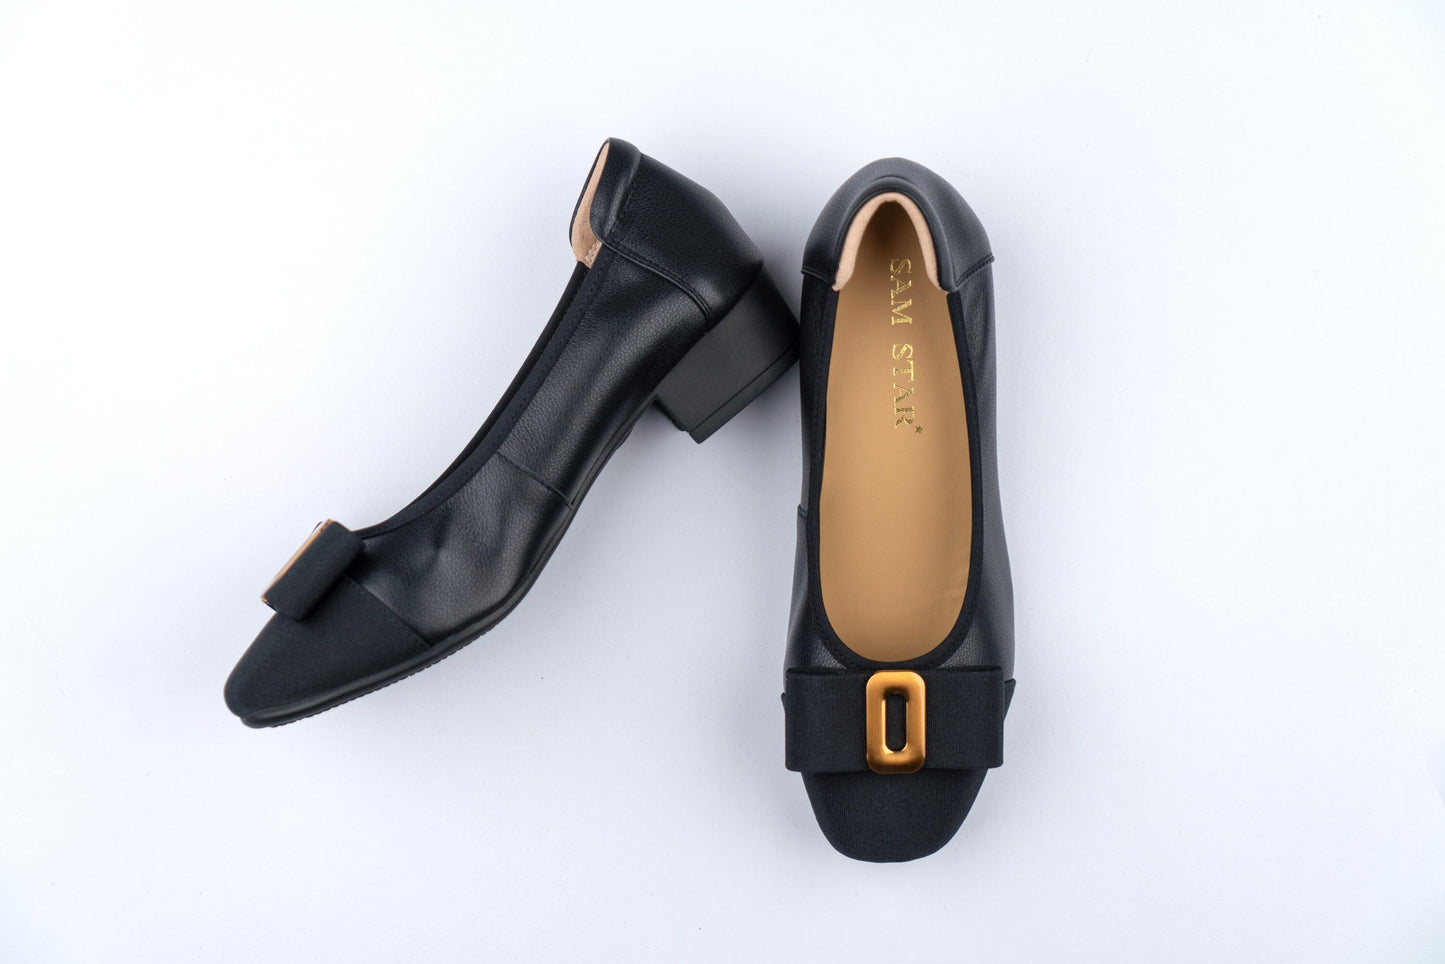 SS23002 Leather pumps with bow& gold buckle block heel ( new arrival ) Pumps Sam Star shoes Black 38/5 